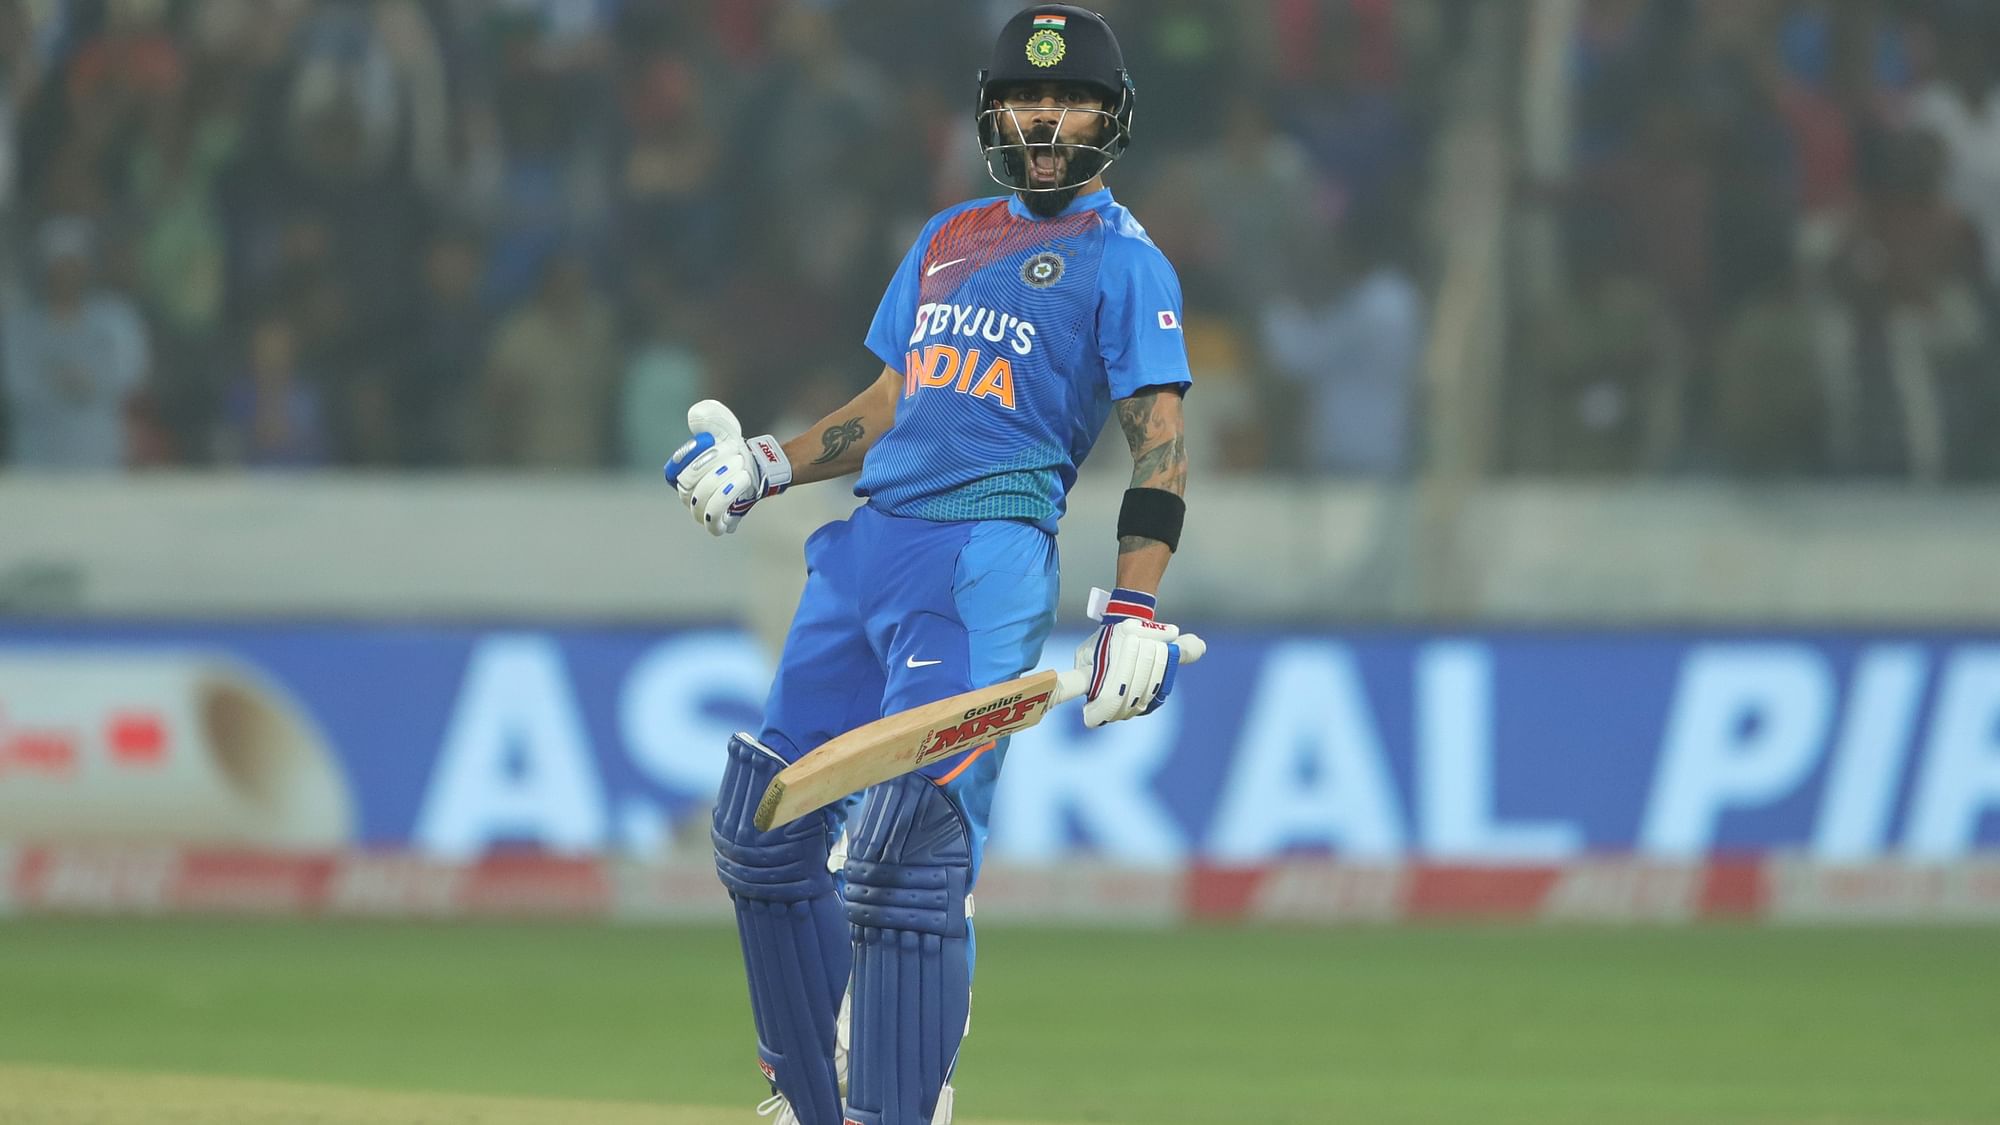 Virat scored career-best 94 not out as India pulled off their highest successful run chase in a T20I.